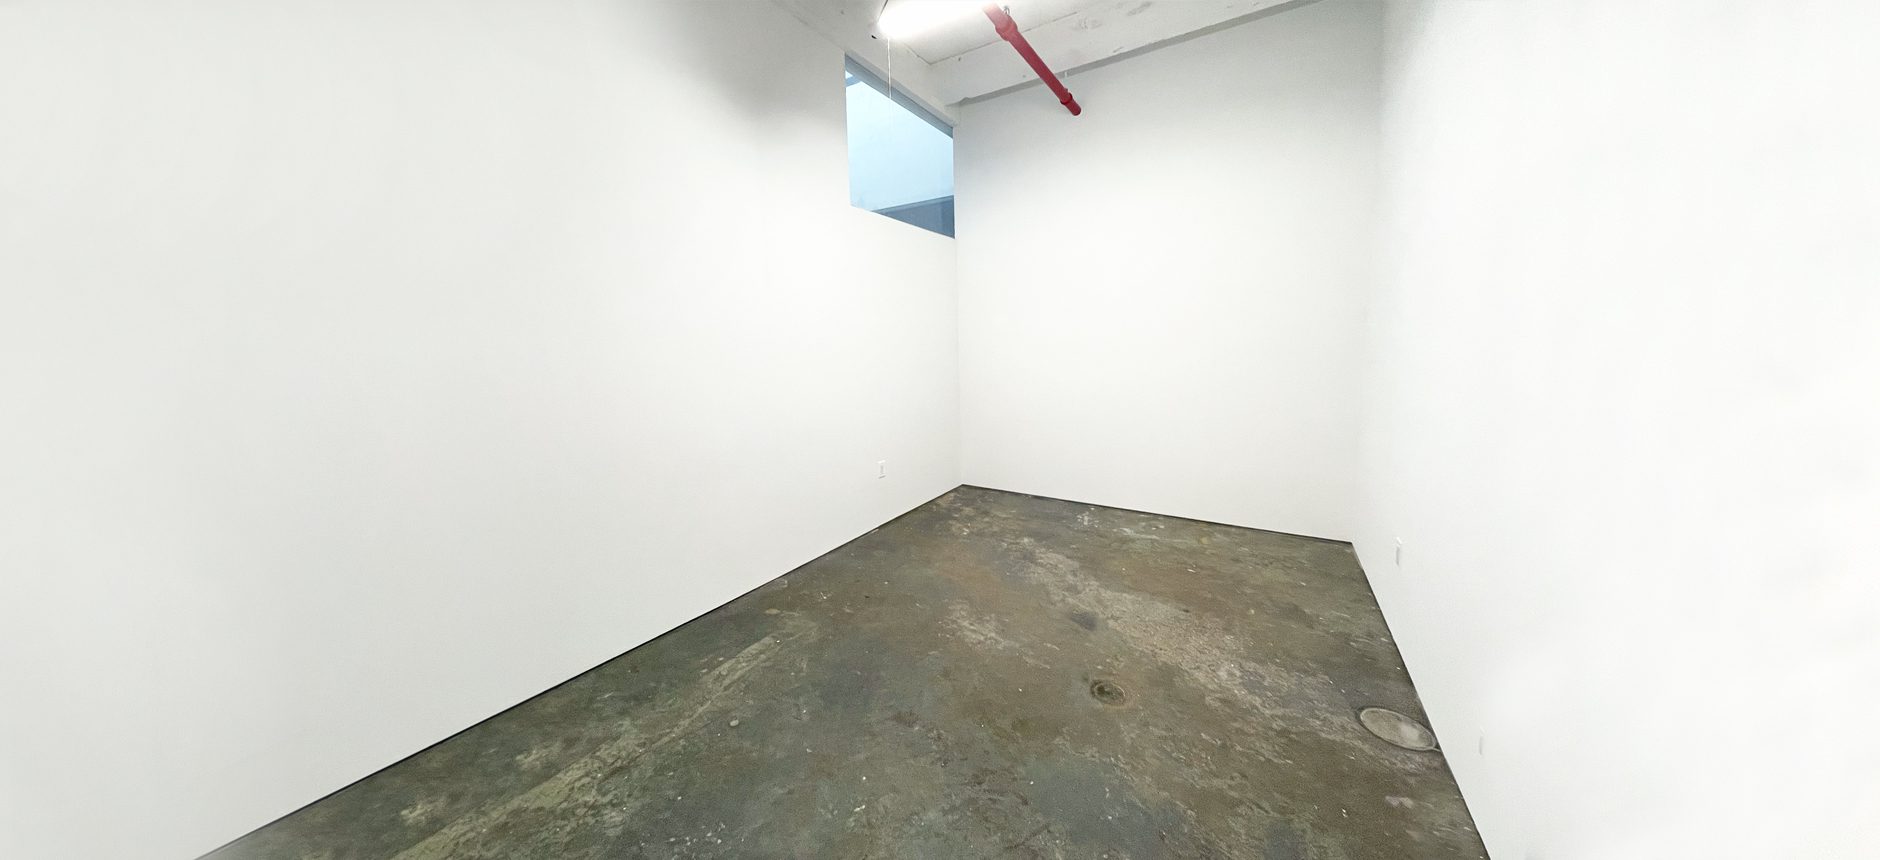 Available Studio 246 | NYC Studio Space for Rent